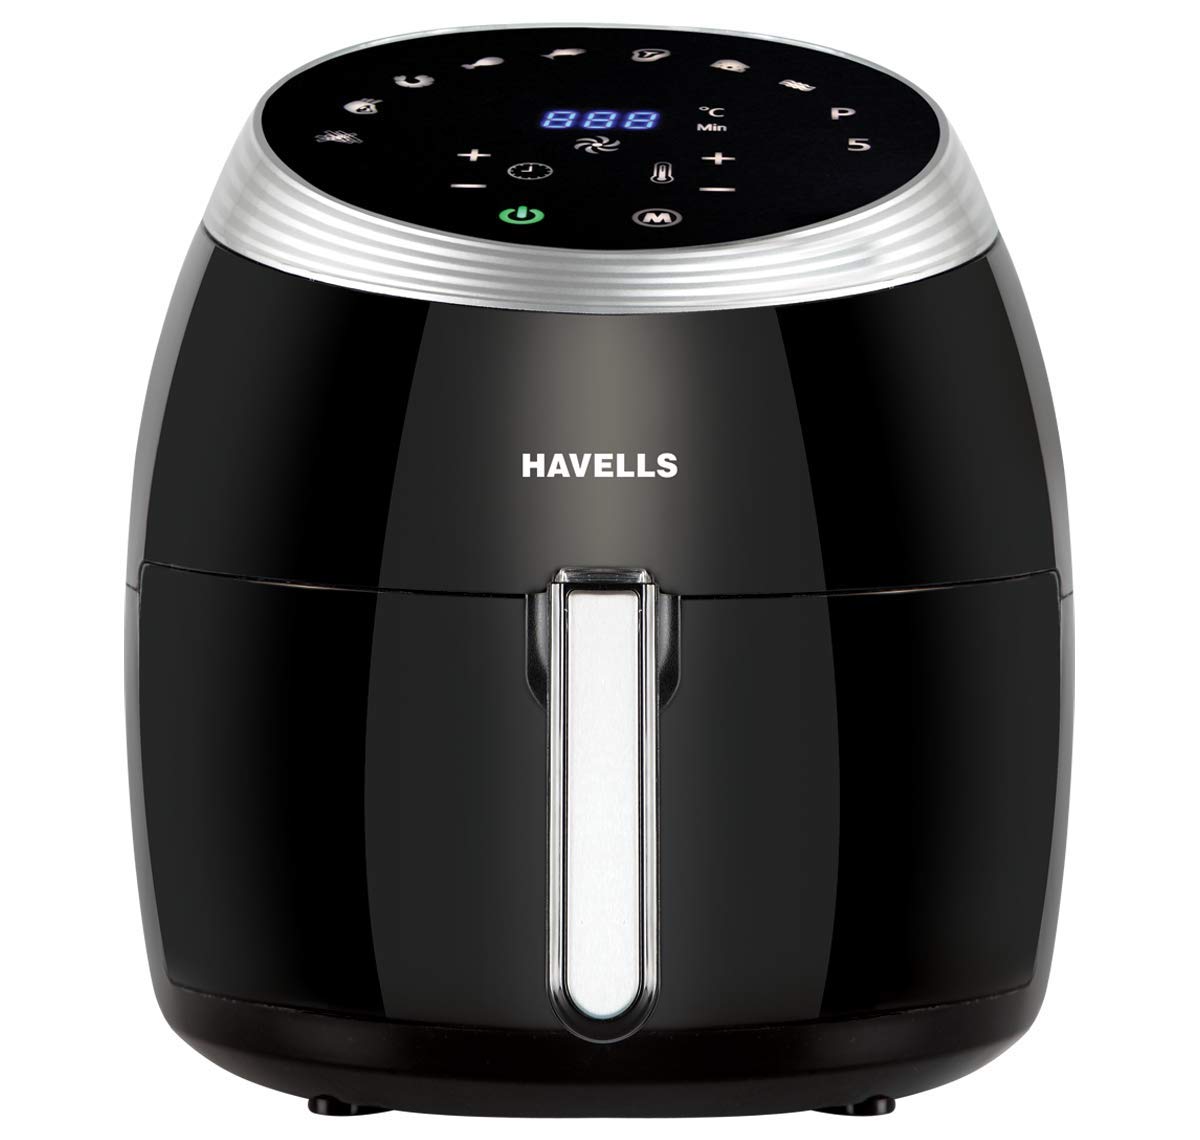 Amazon Sale: Now eat a lot of fried food on every festival and stay fit, know the deals and specialties of Top 5 Air Fryer